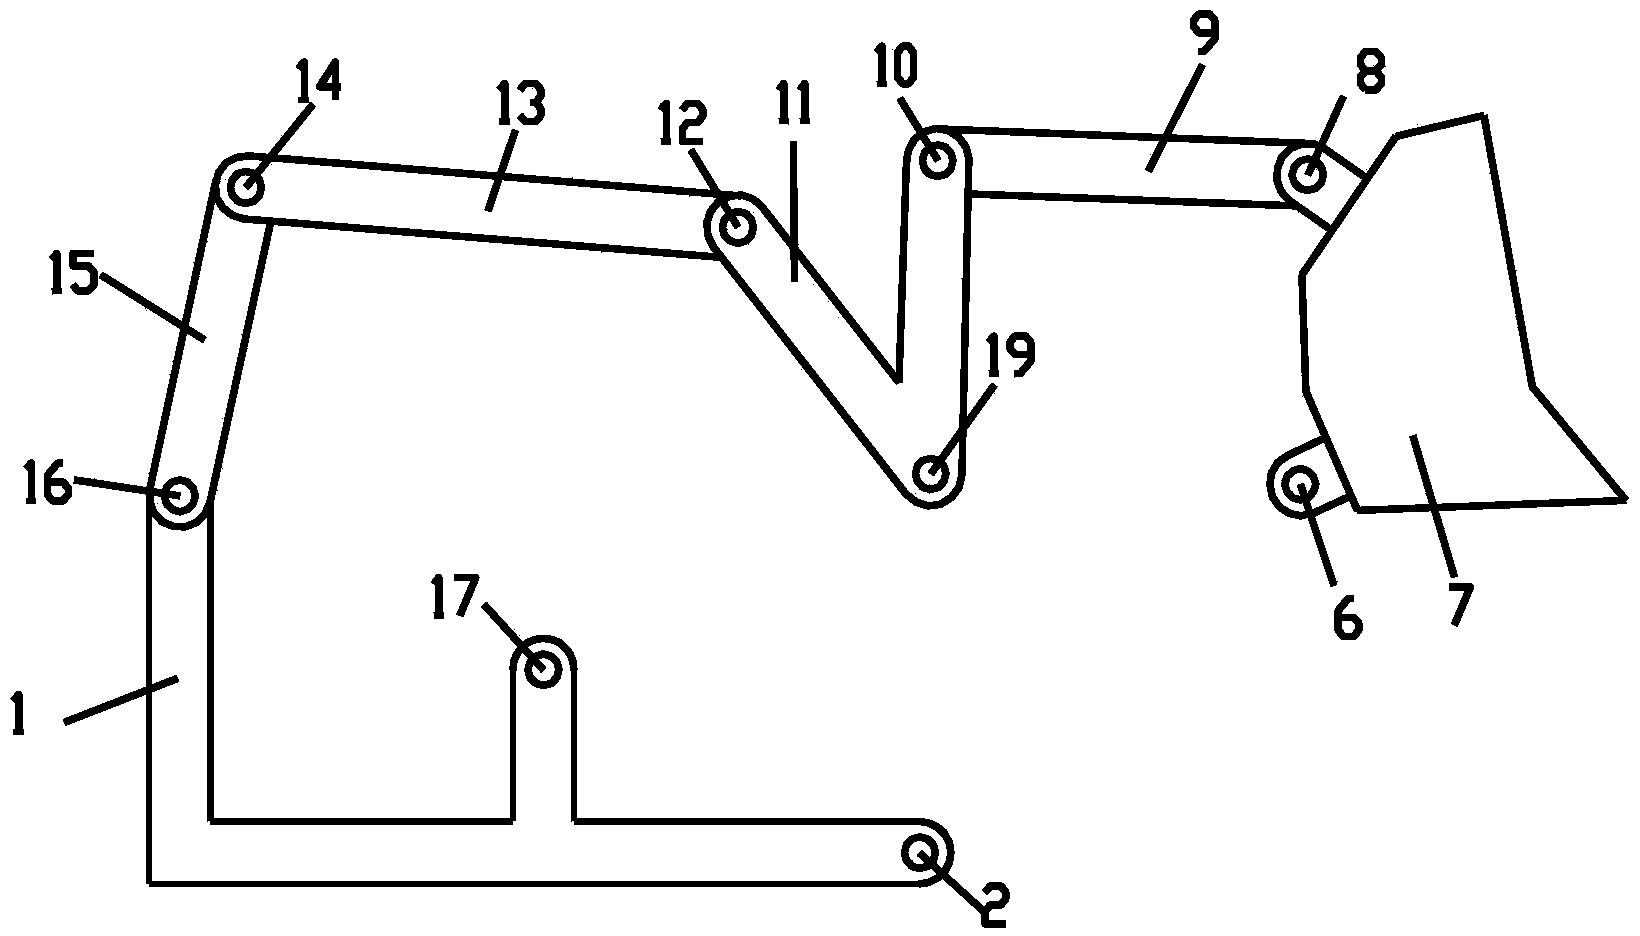 Loading mechanism adopting MDOF (multiple degree of freedom) controllable connecting rods